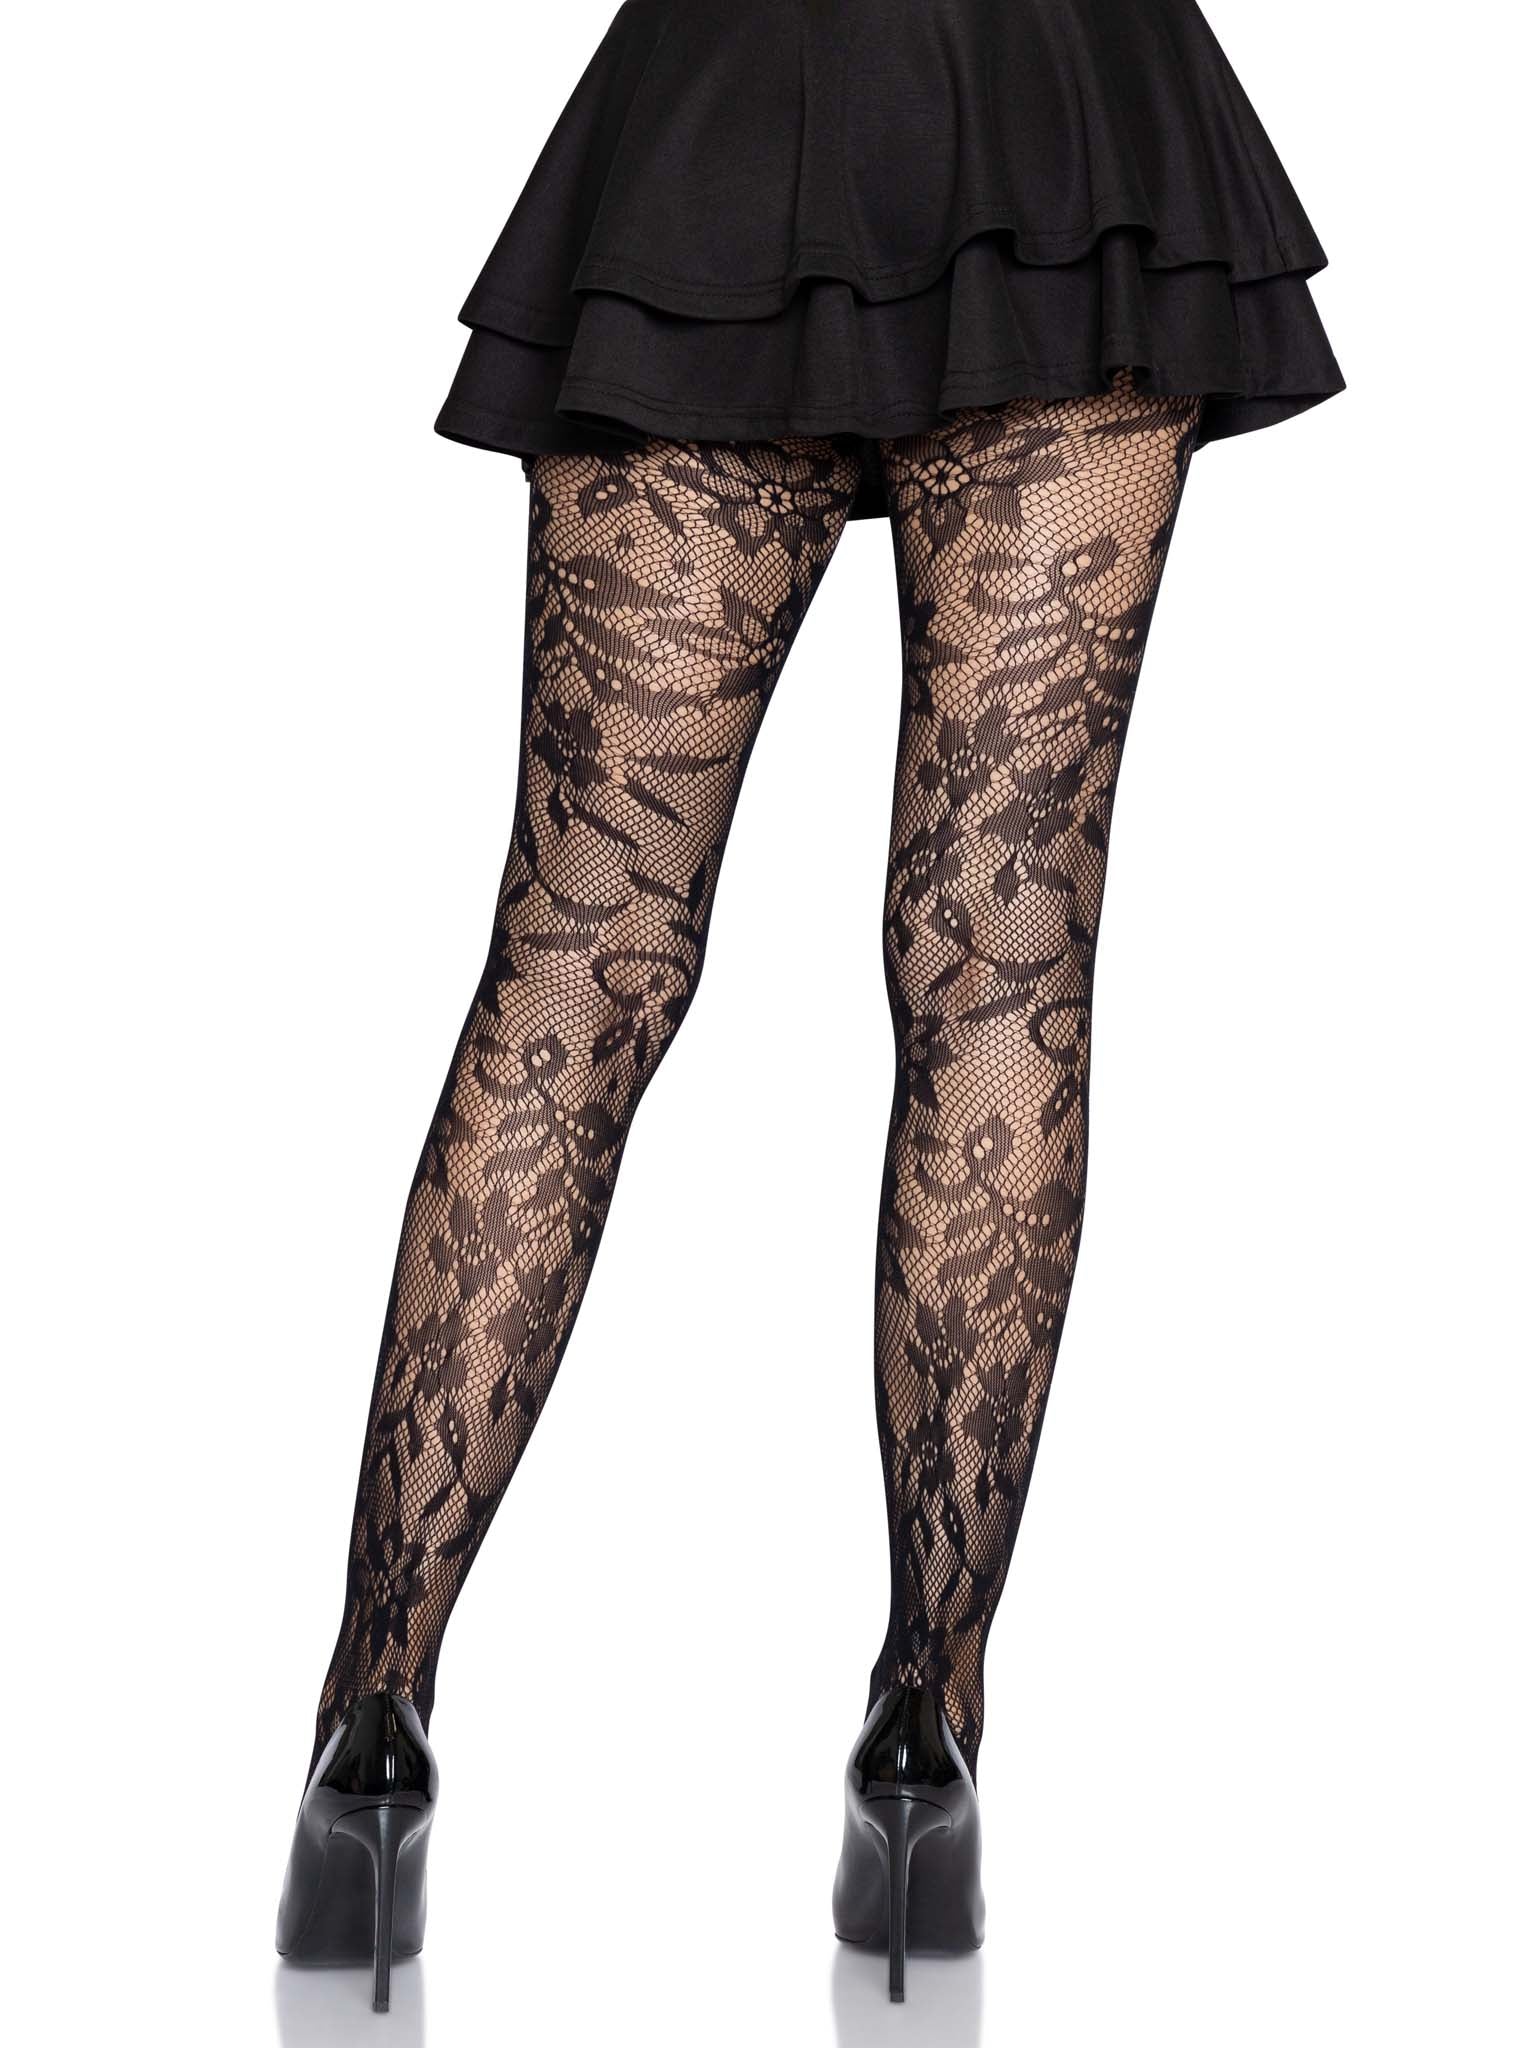 French Venise Floral Lace Multi Lace Pantyhose Tights